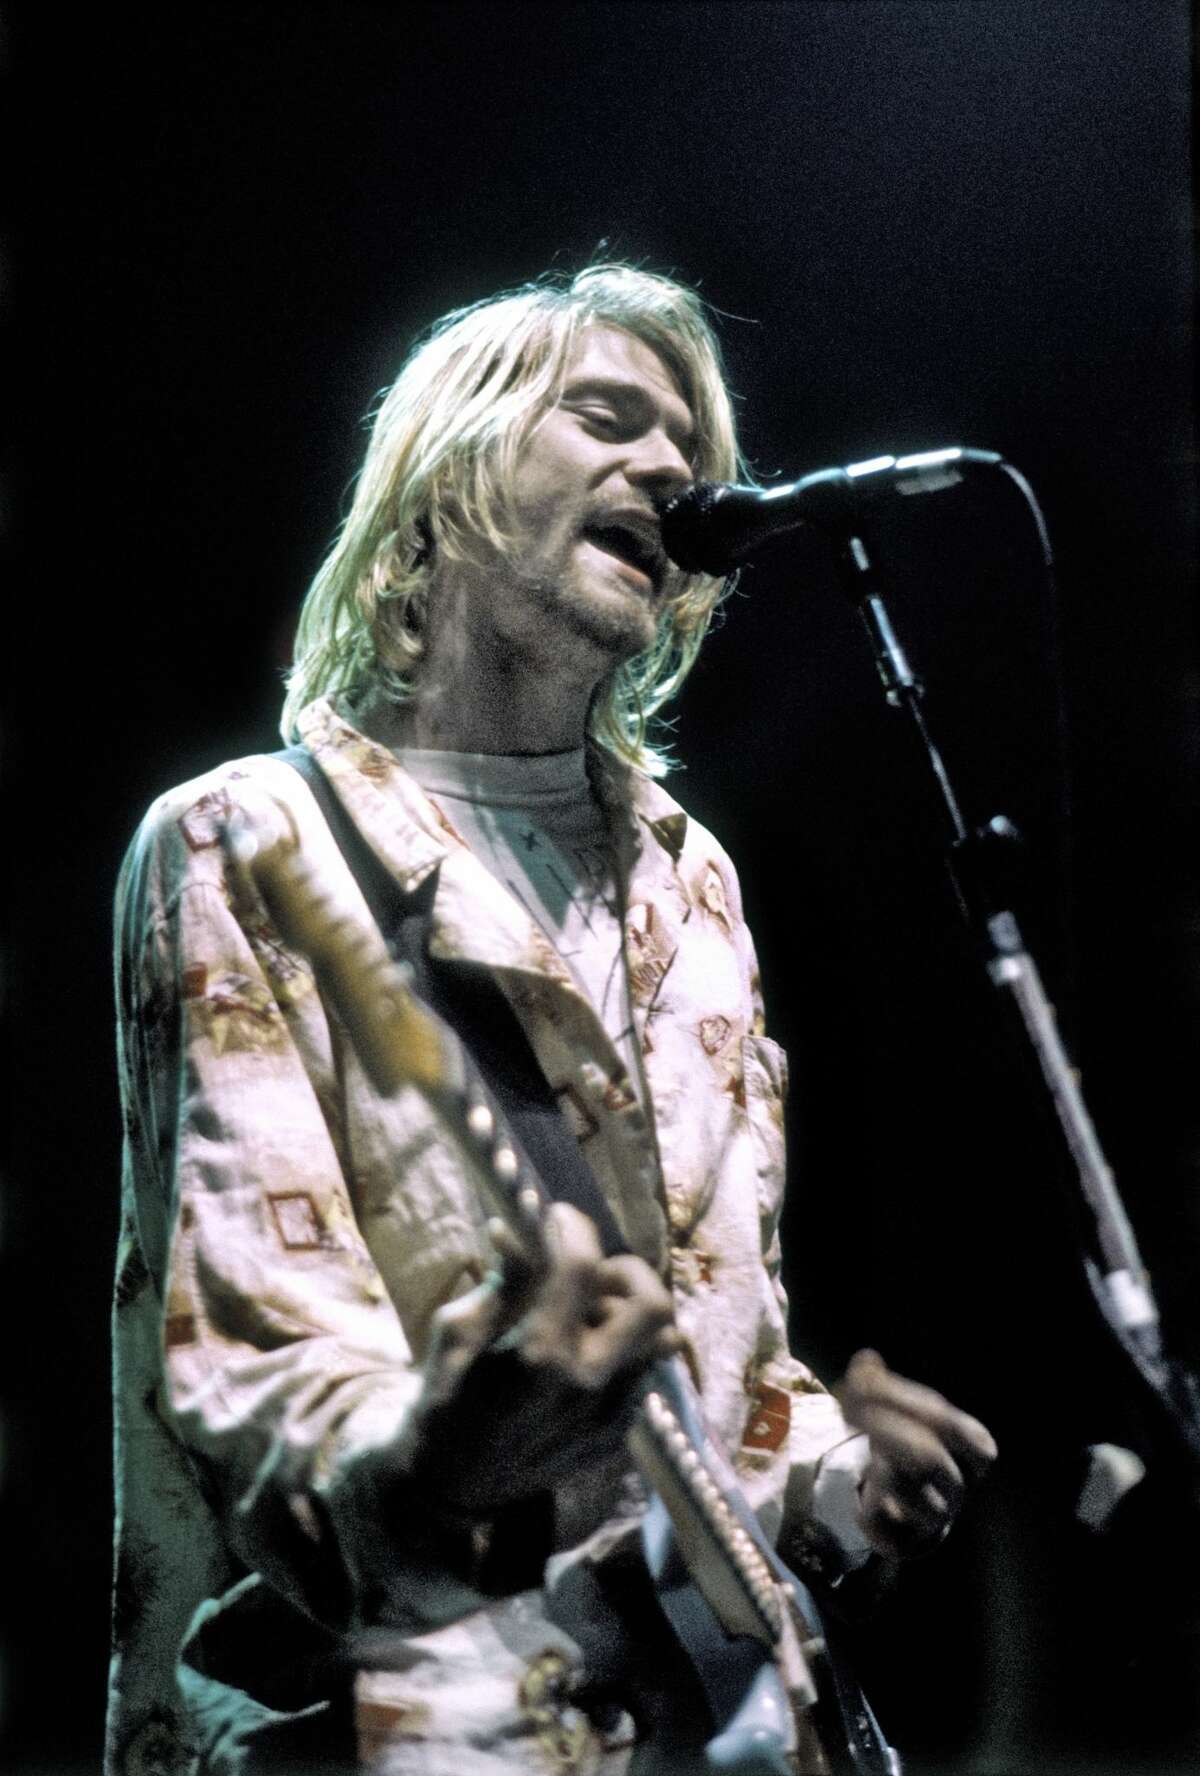 Rock musician Kurt Cobain of Nirvana plays his last US concert at the Seattle Arena on January 7, 1994 in Seattle, Washington. (Photo by Michael Ochs Archives/Getty Images)